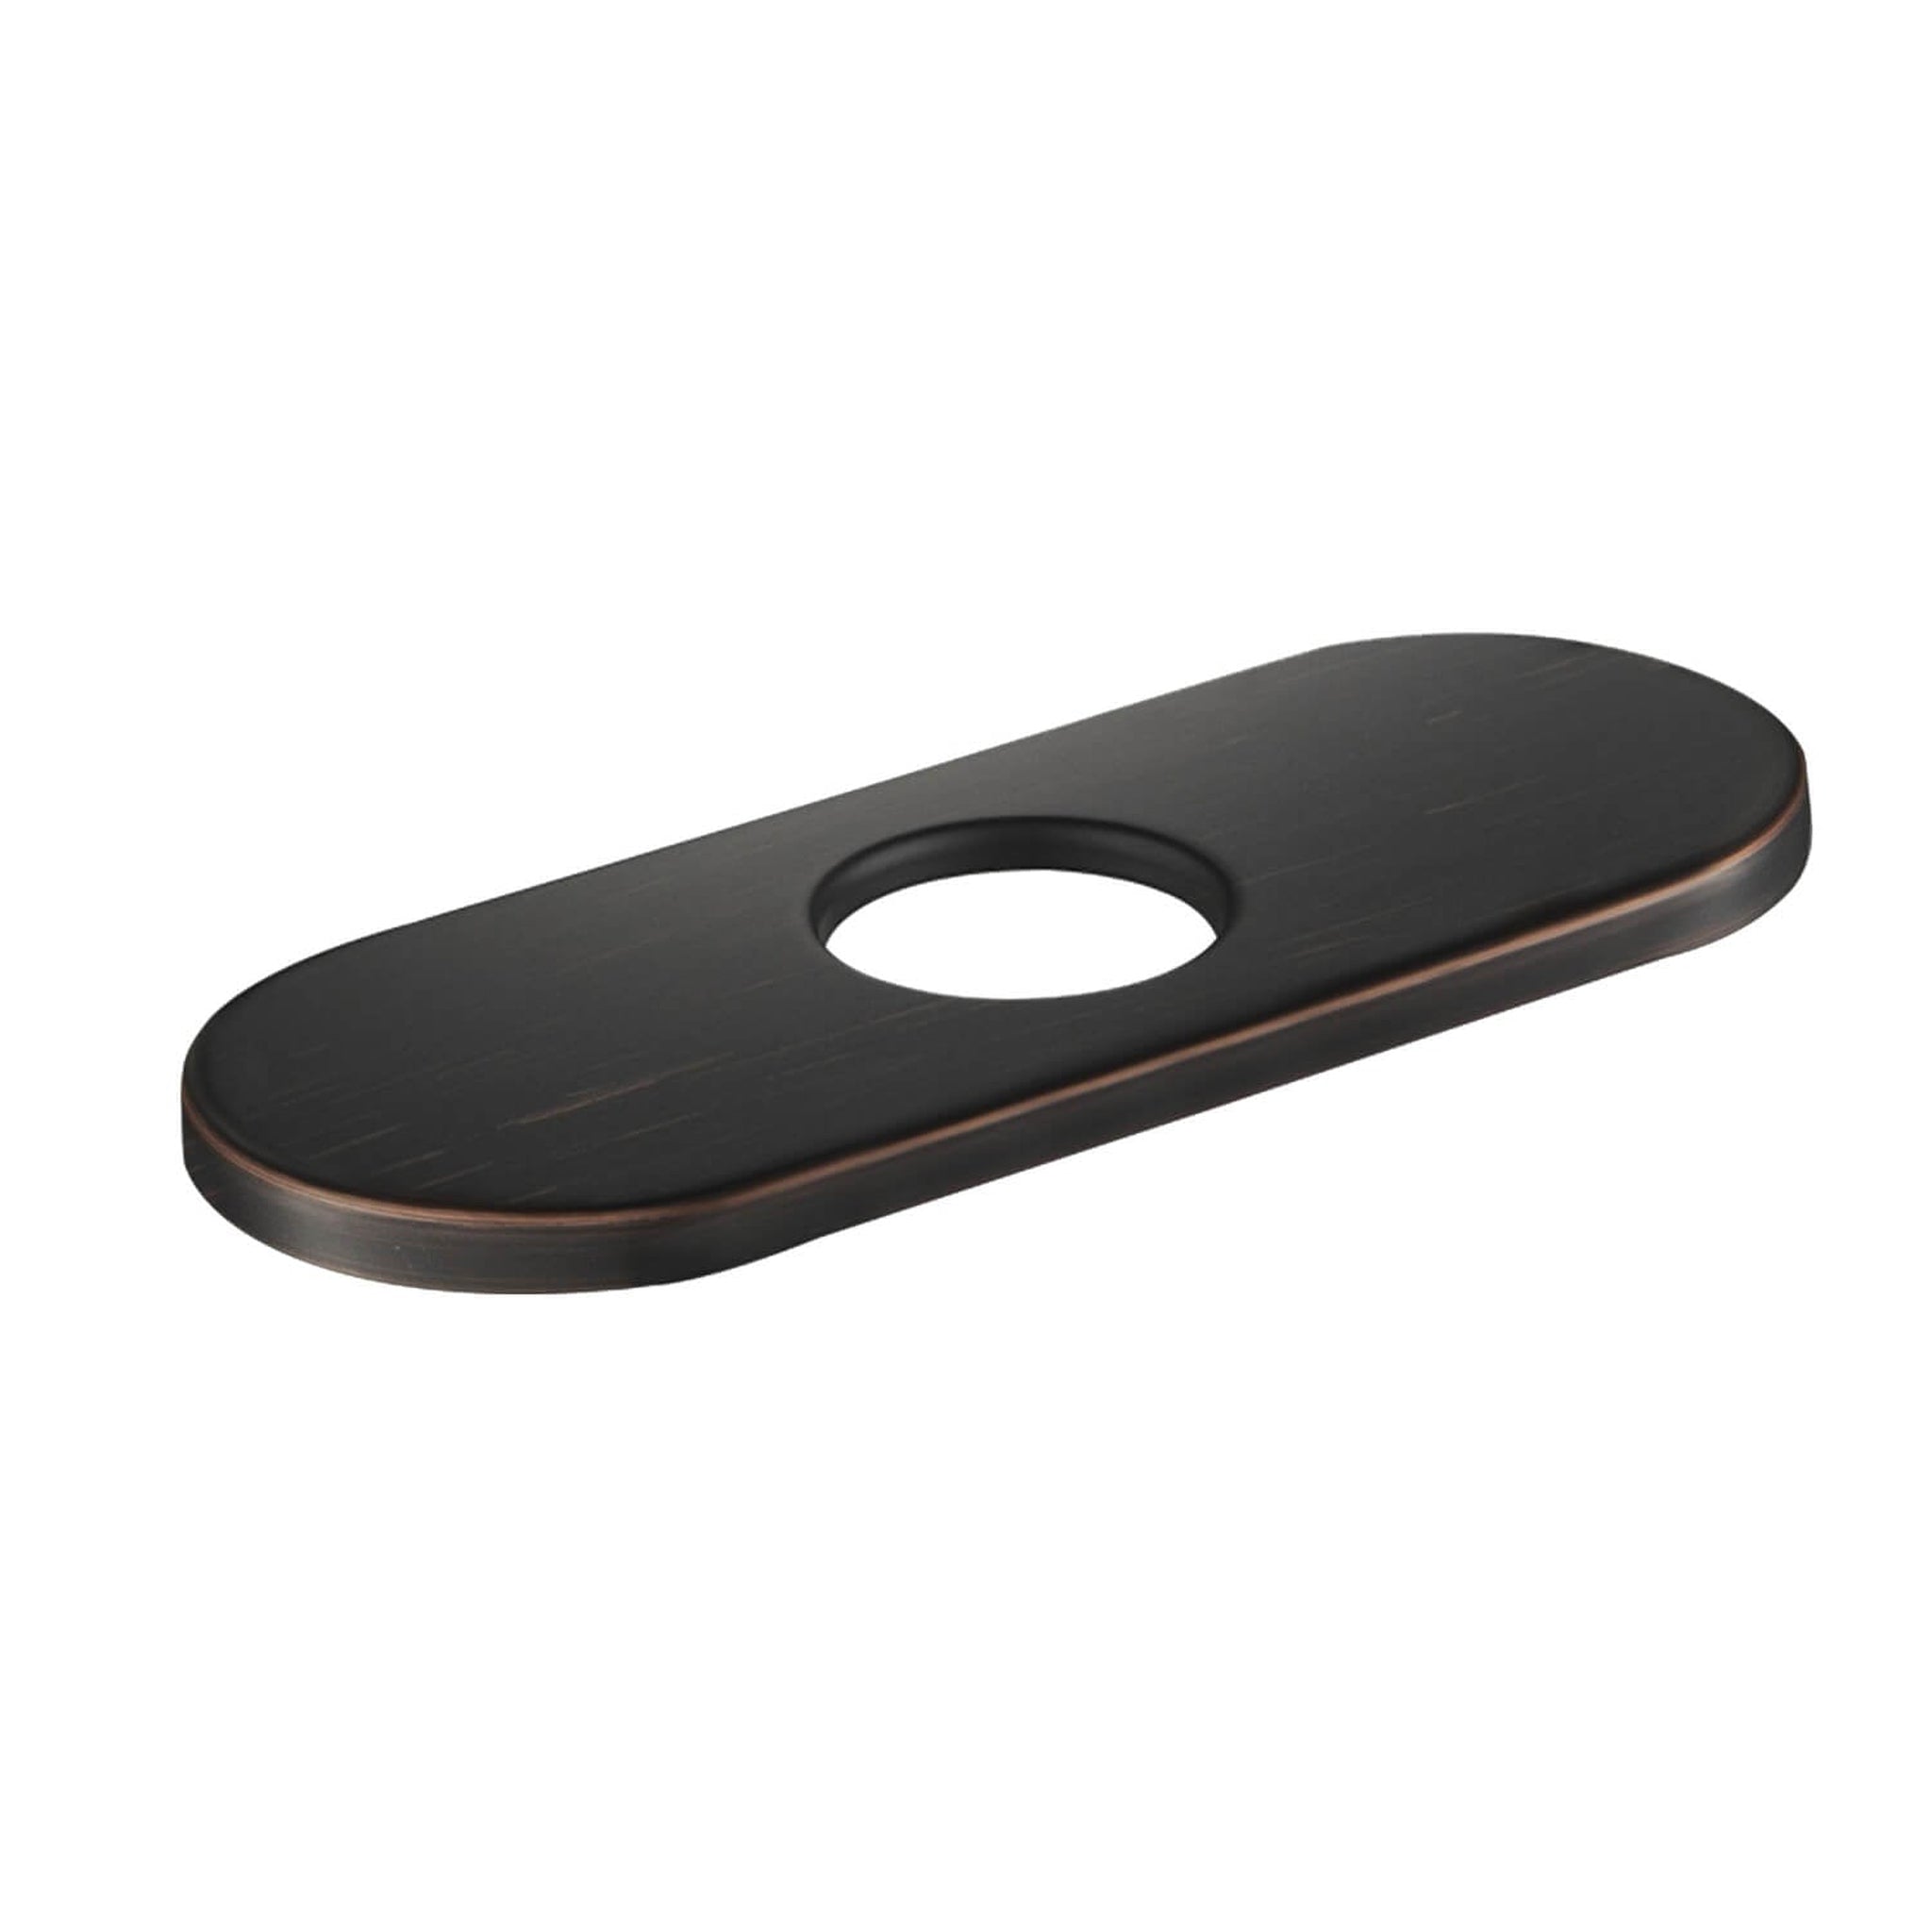 KIBI, KIBI 6" Stainless Steel Faucet Hole Cover in Oil Rubbed Bronze Finish